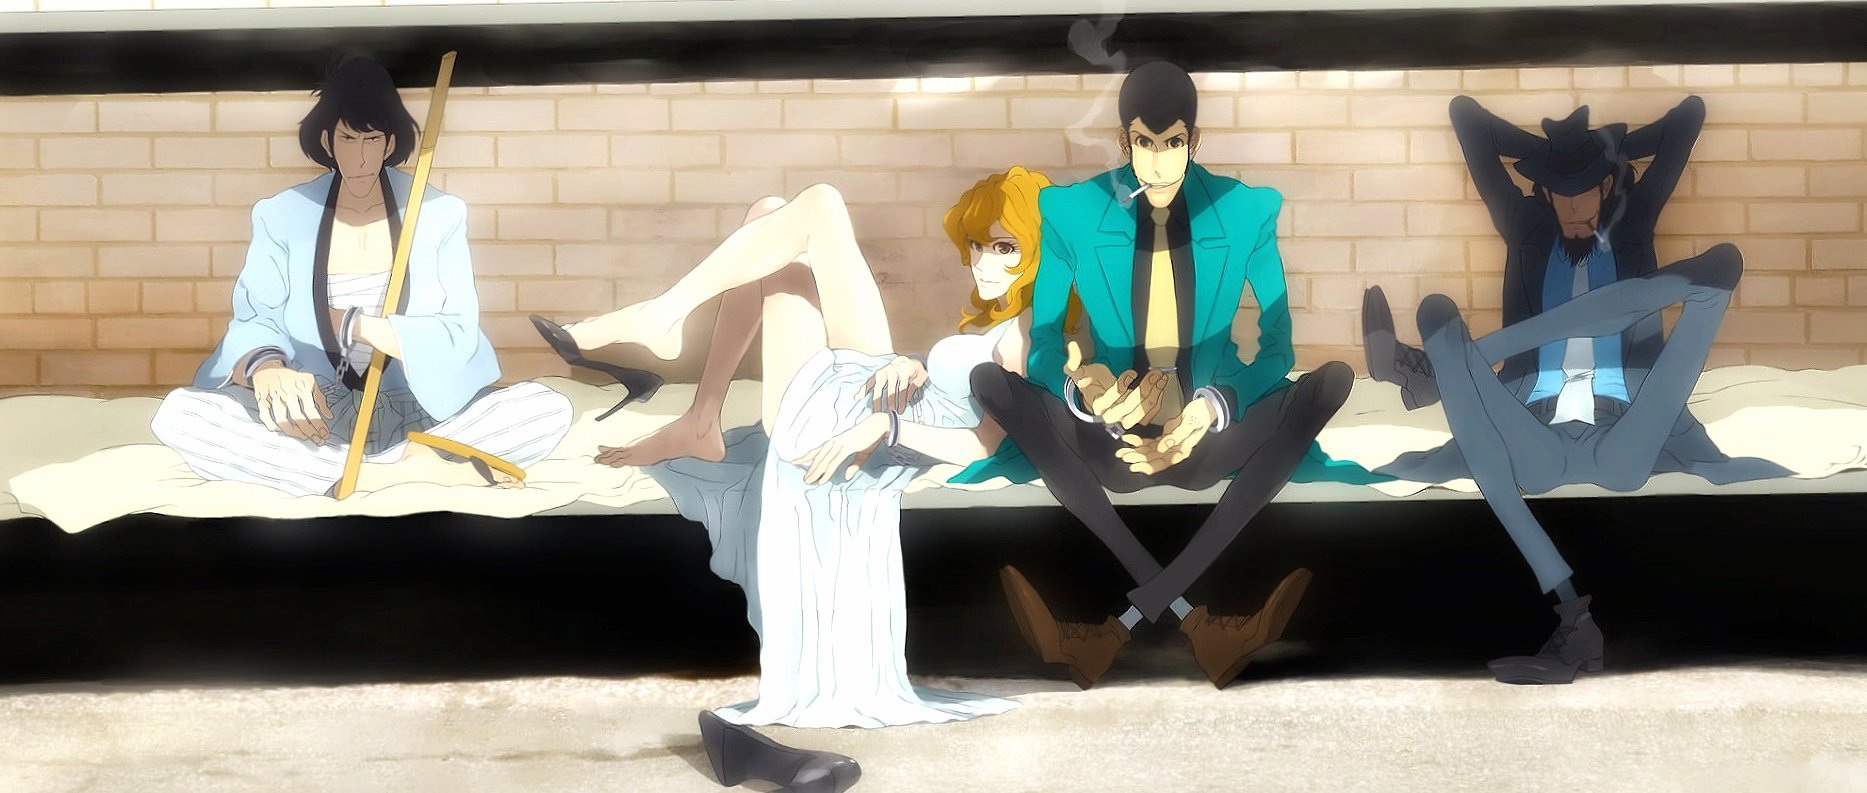 Lupin The Third wallpapers HD quality